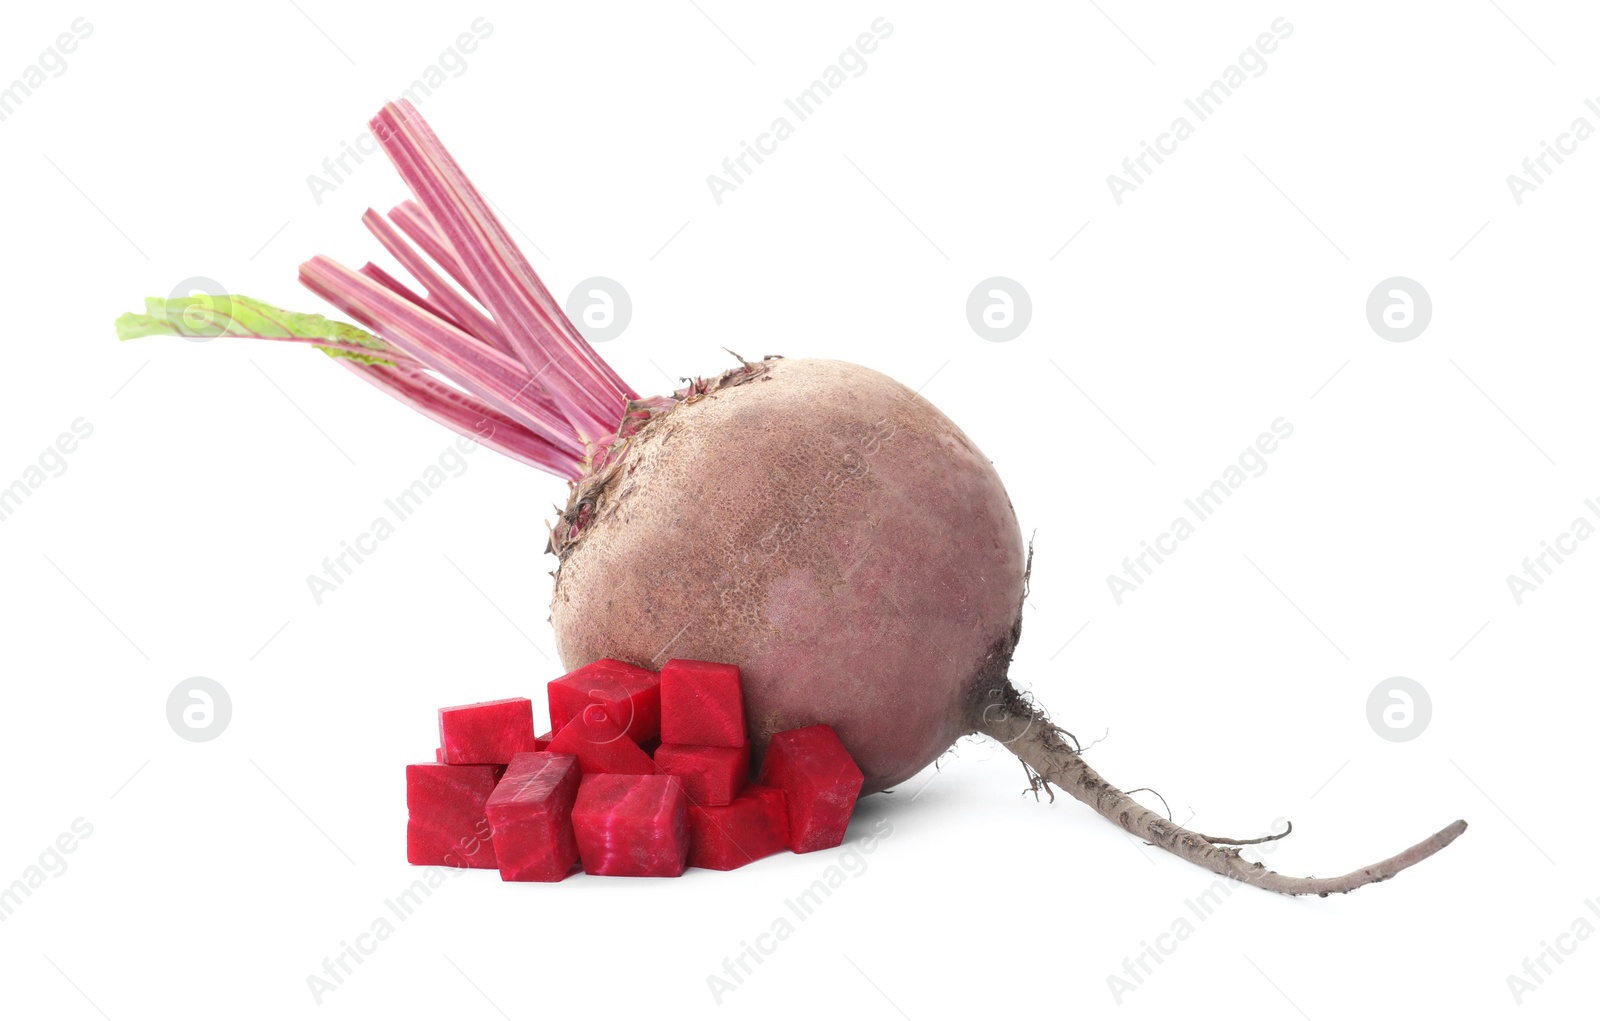 Photo of Whole and cut red beets on white background